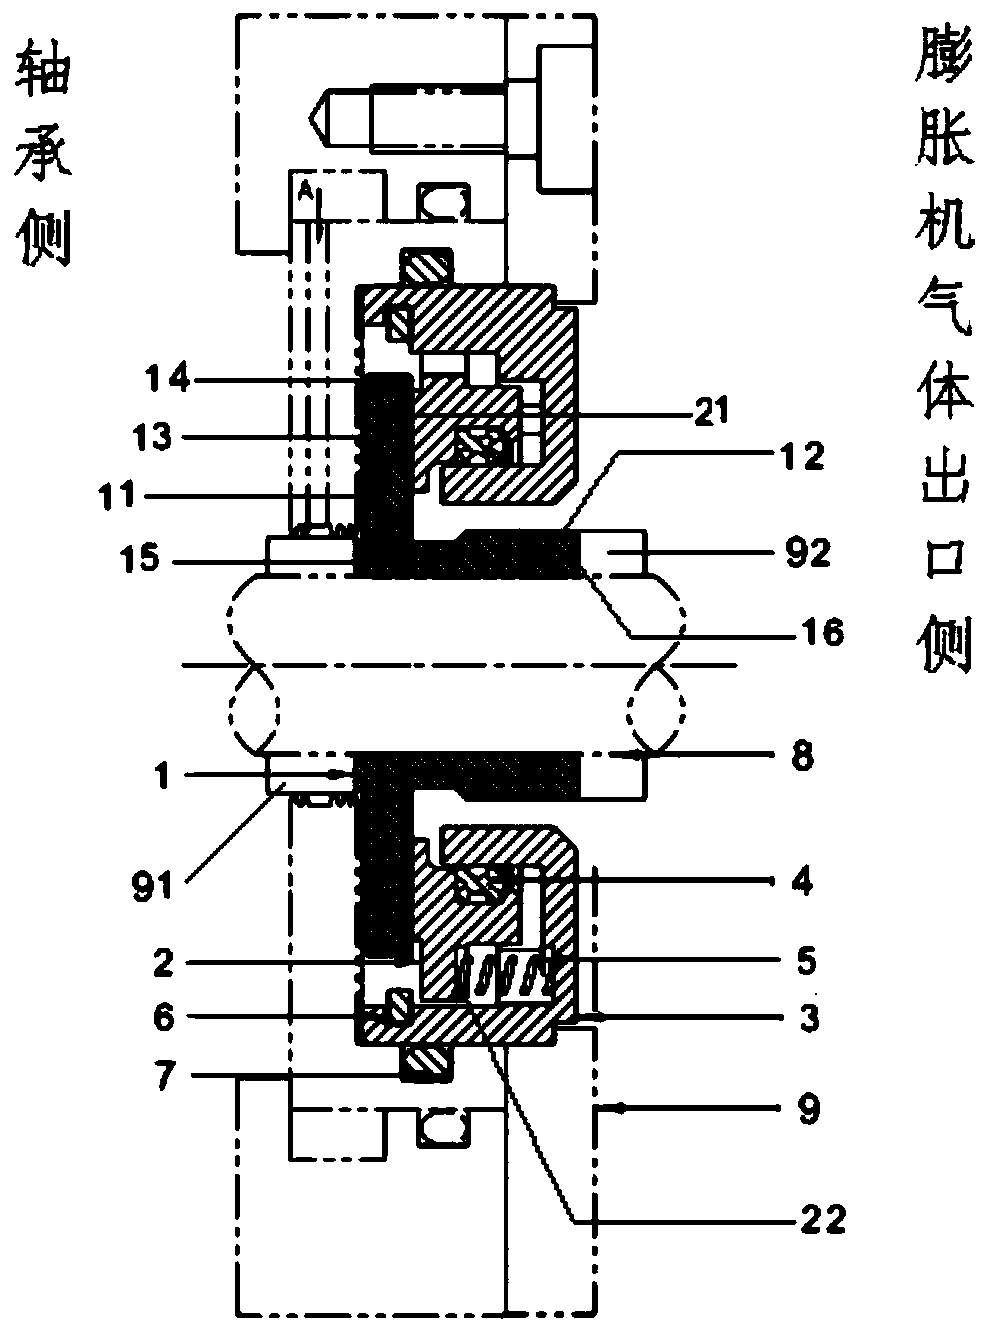 Gas lubrication hydrodynamic sealing device used for miniature high-speed turbo expander